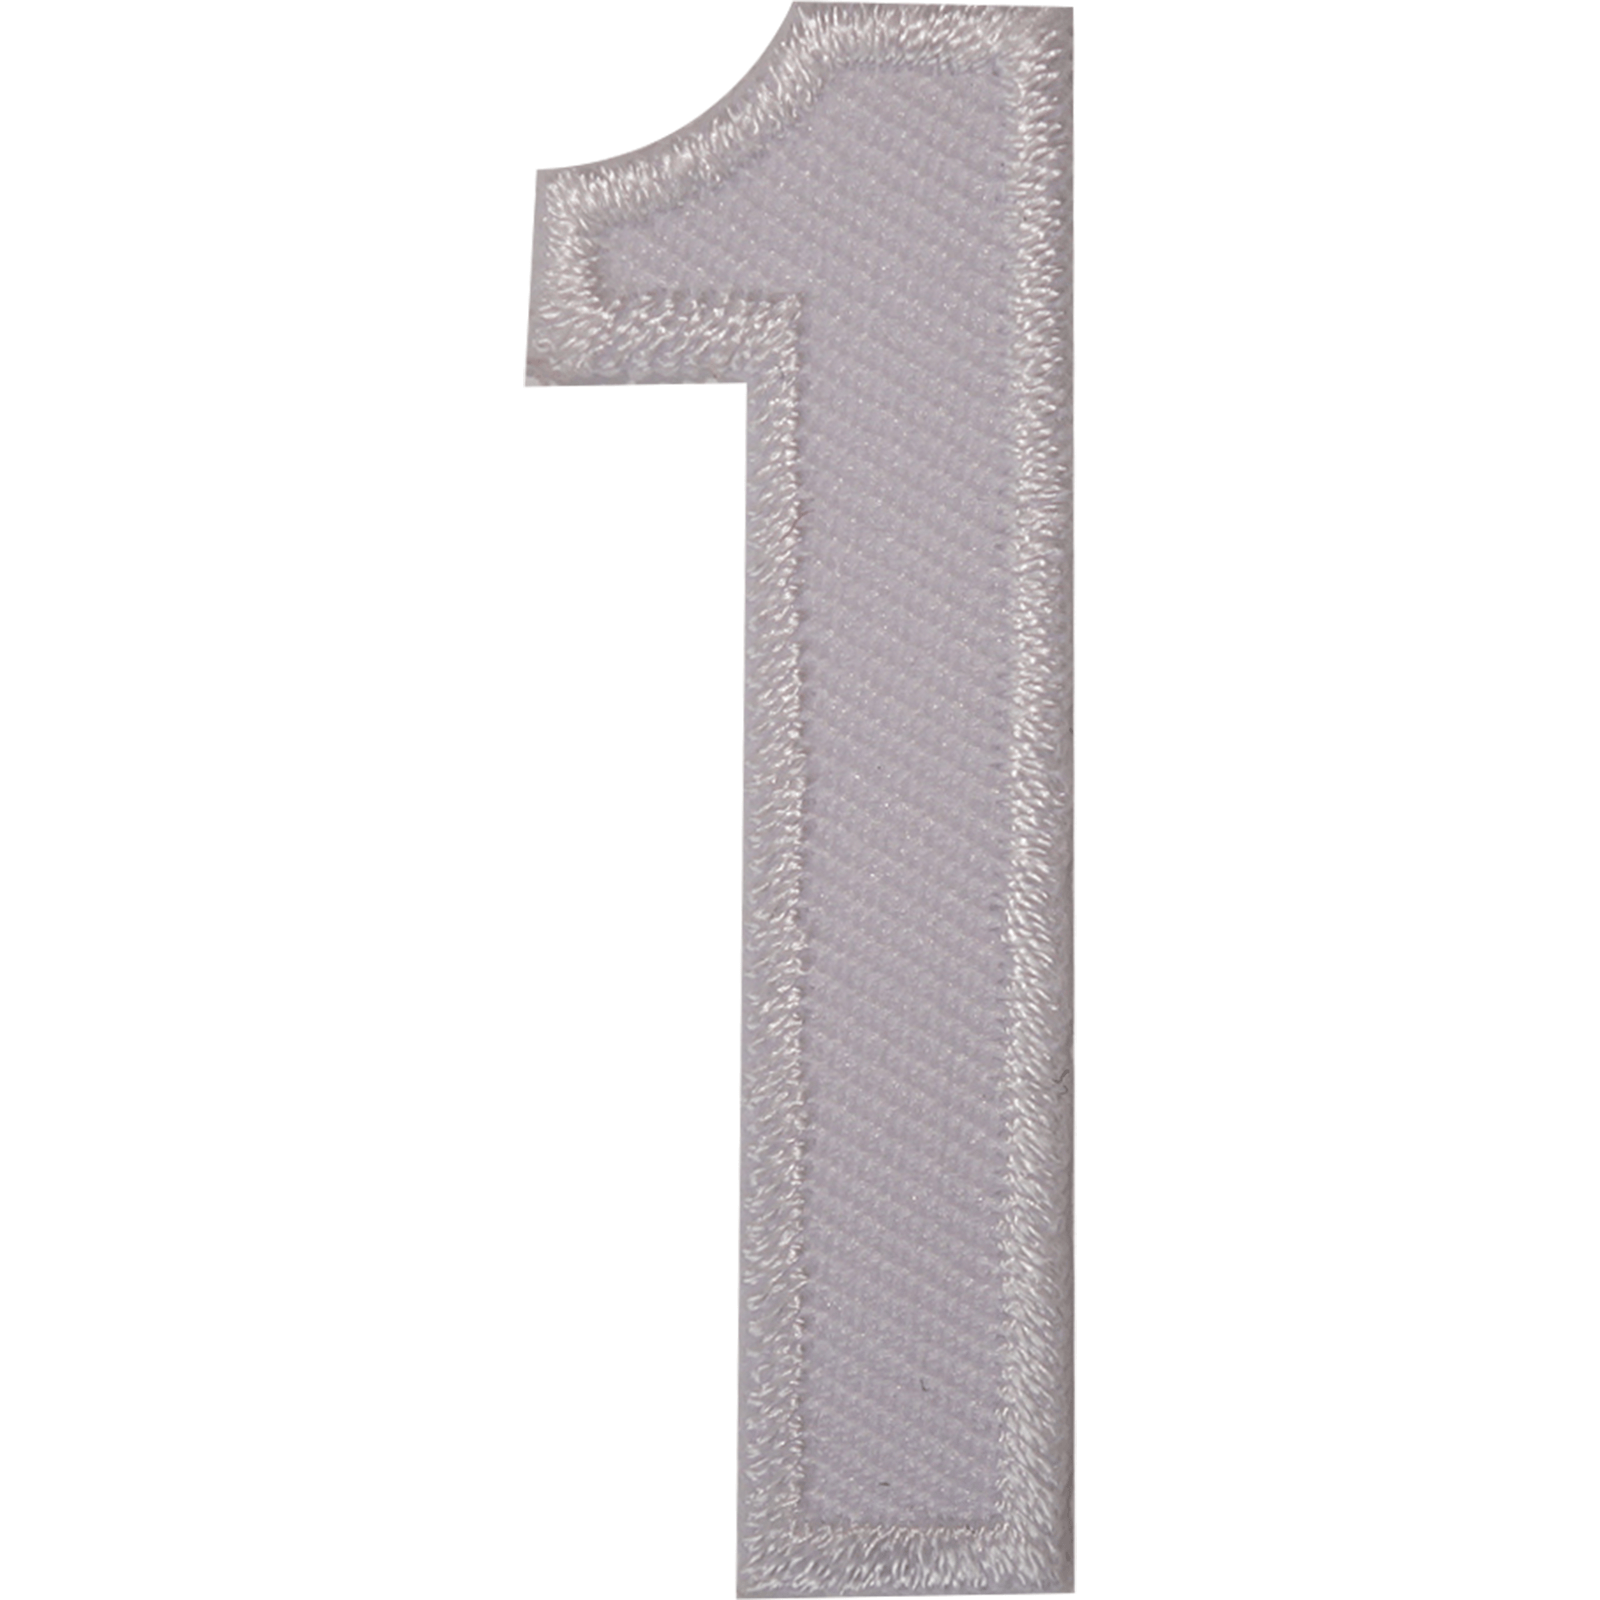 Number 1 ( Number One ) White Letter Number Iron Sew On Patches Badges Name Letters Numbers Badge Patch